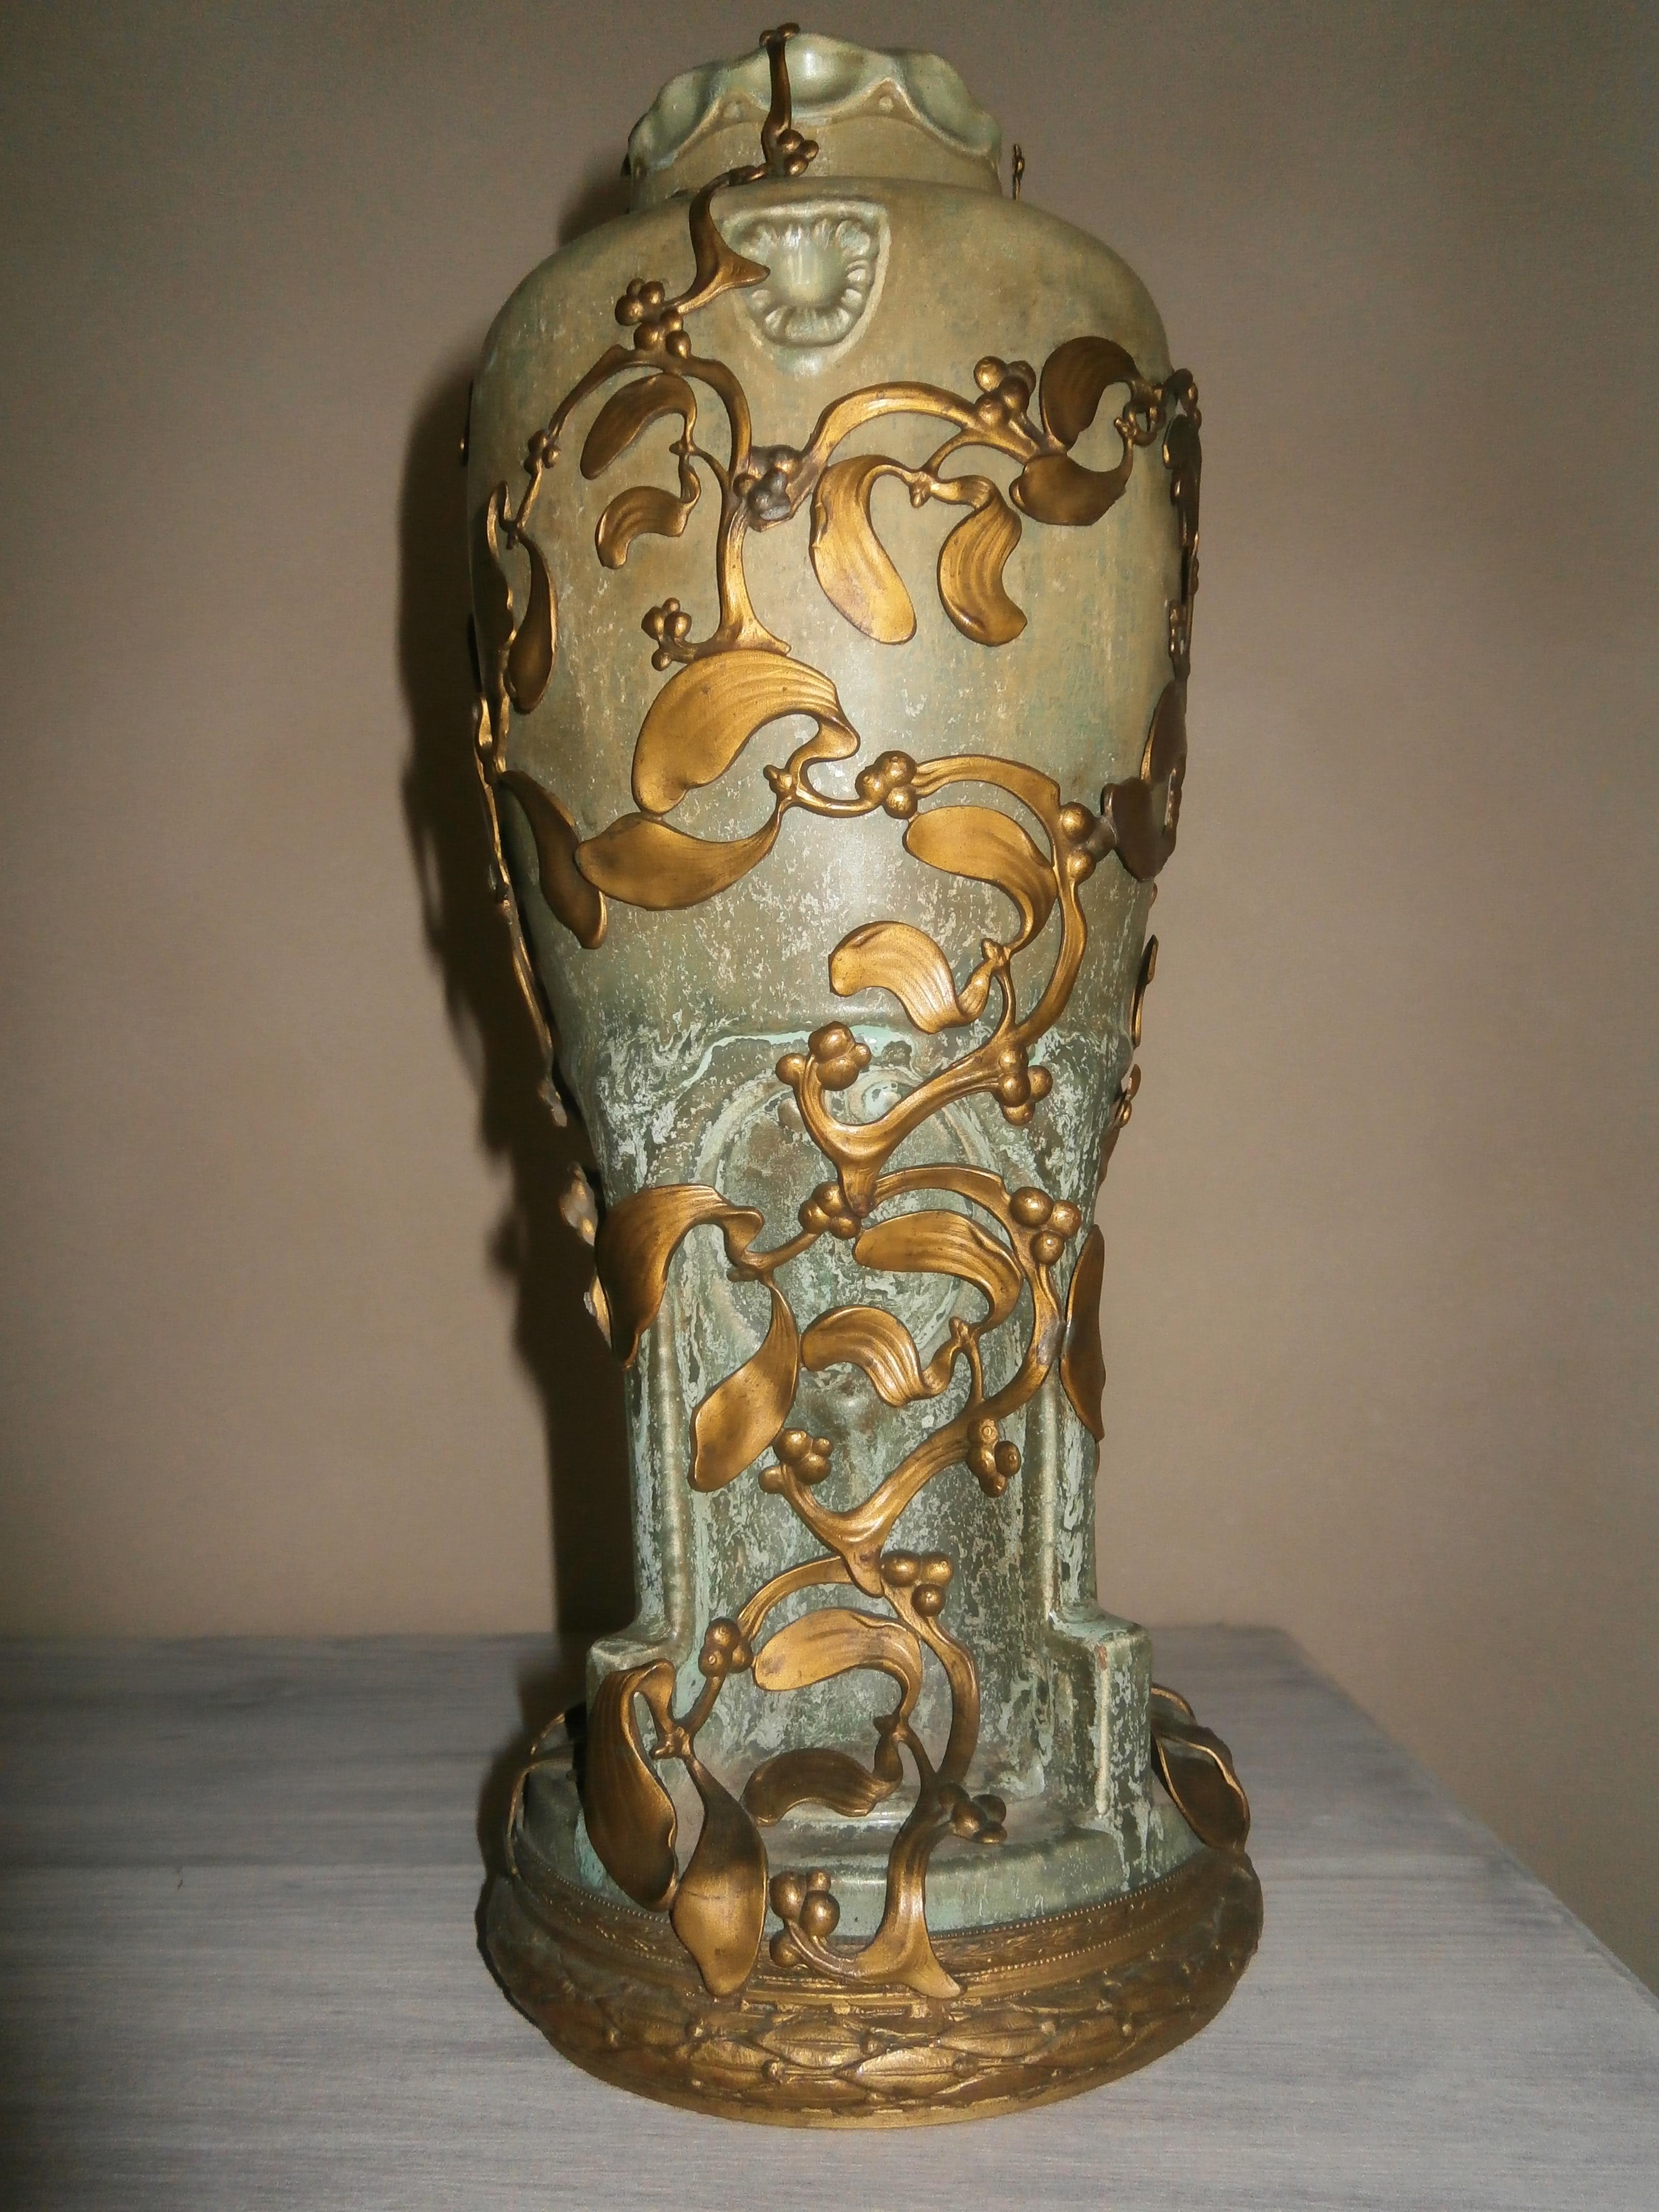 Large stoneware vase in an extraordinary brass frame decorated with mistletoe branches.